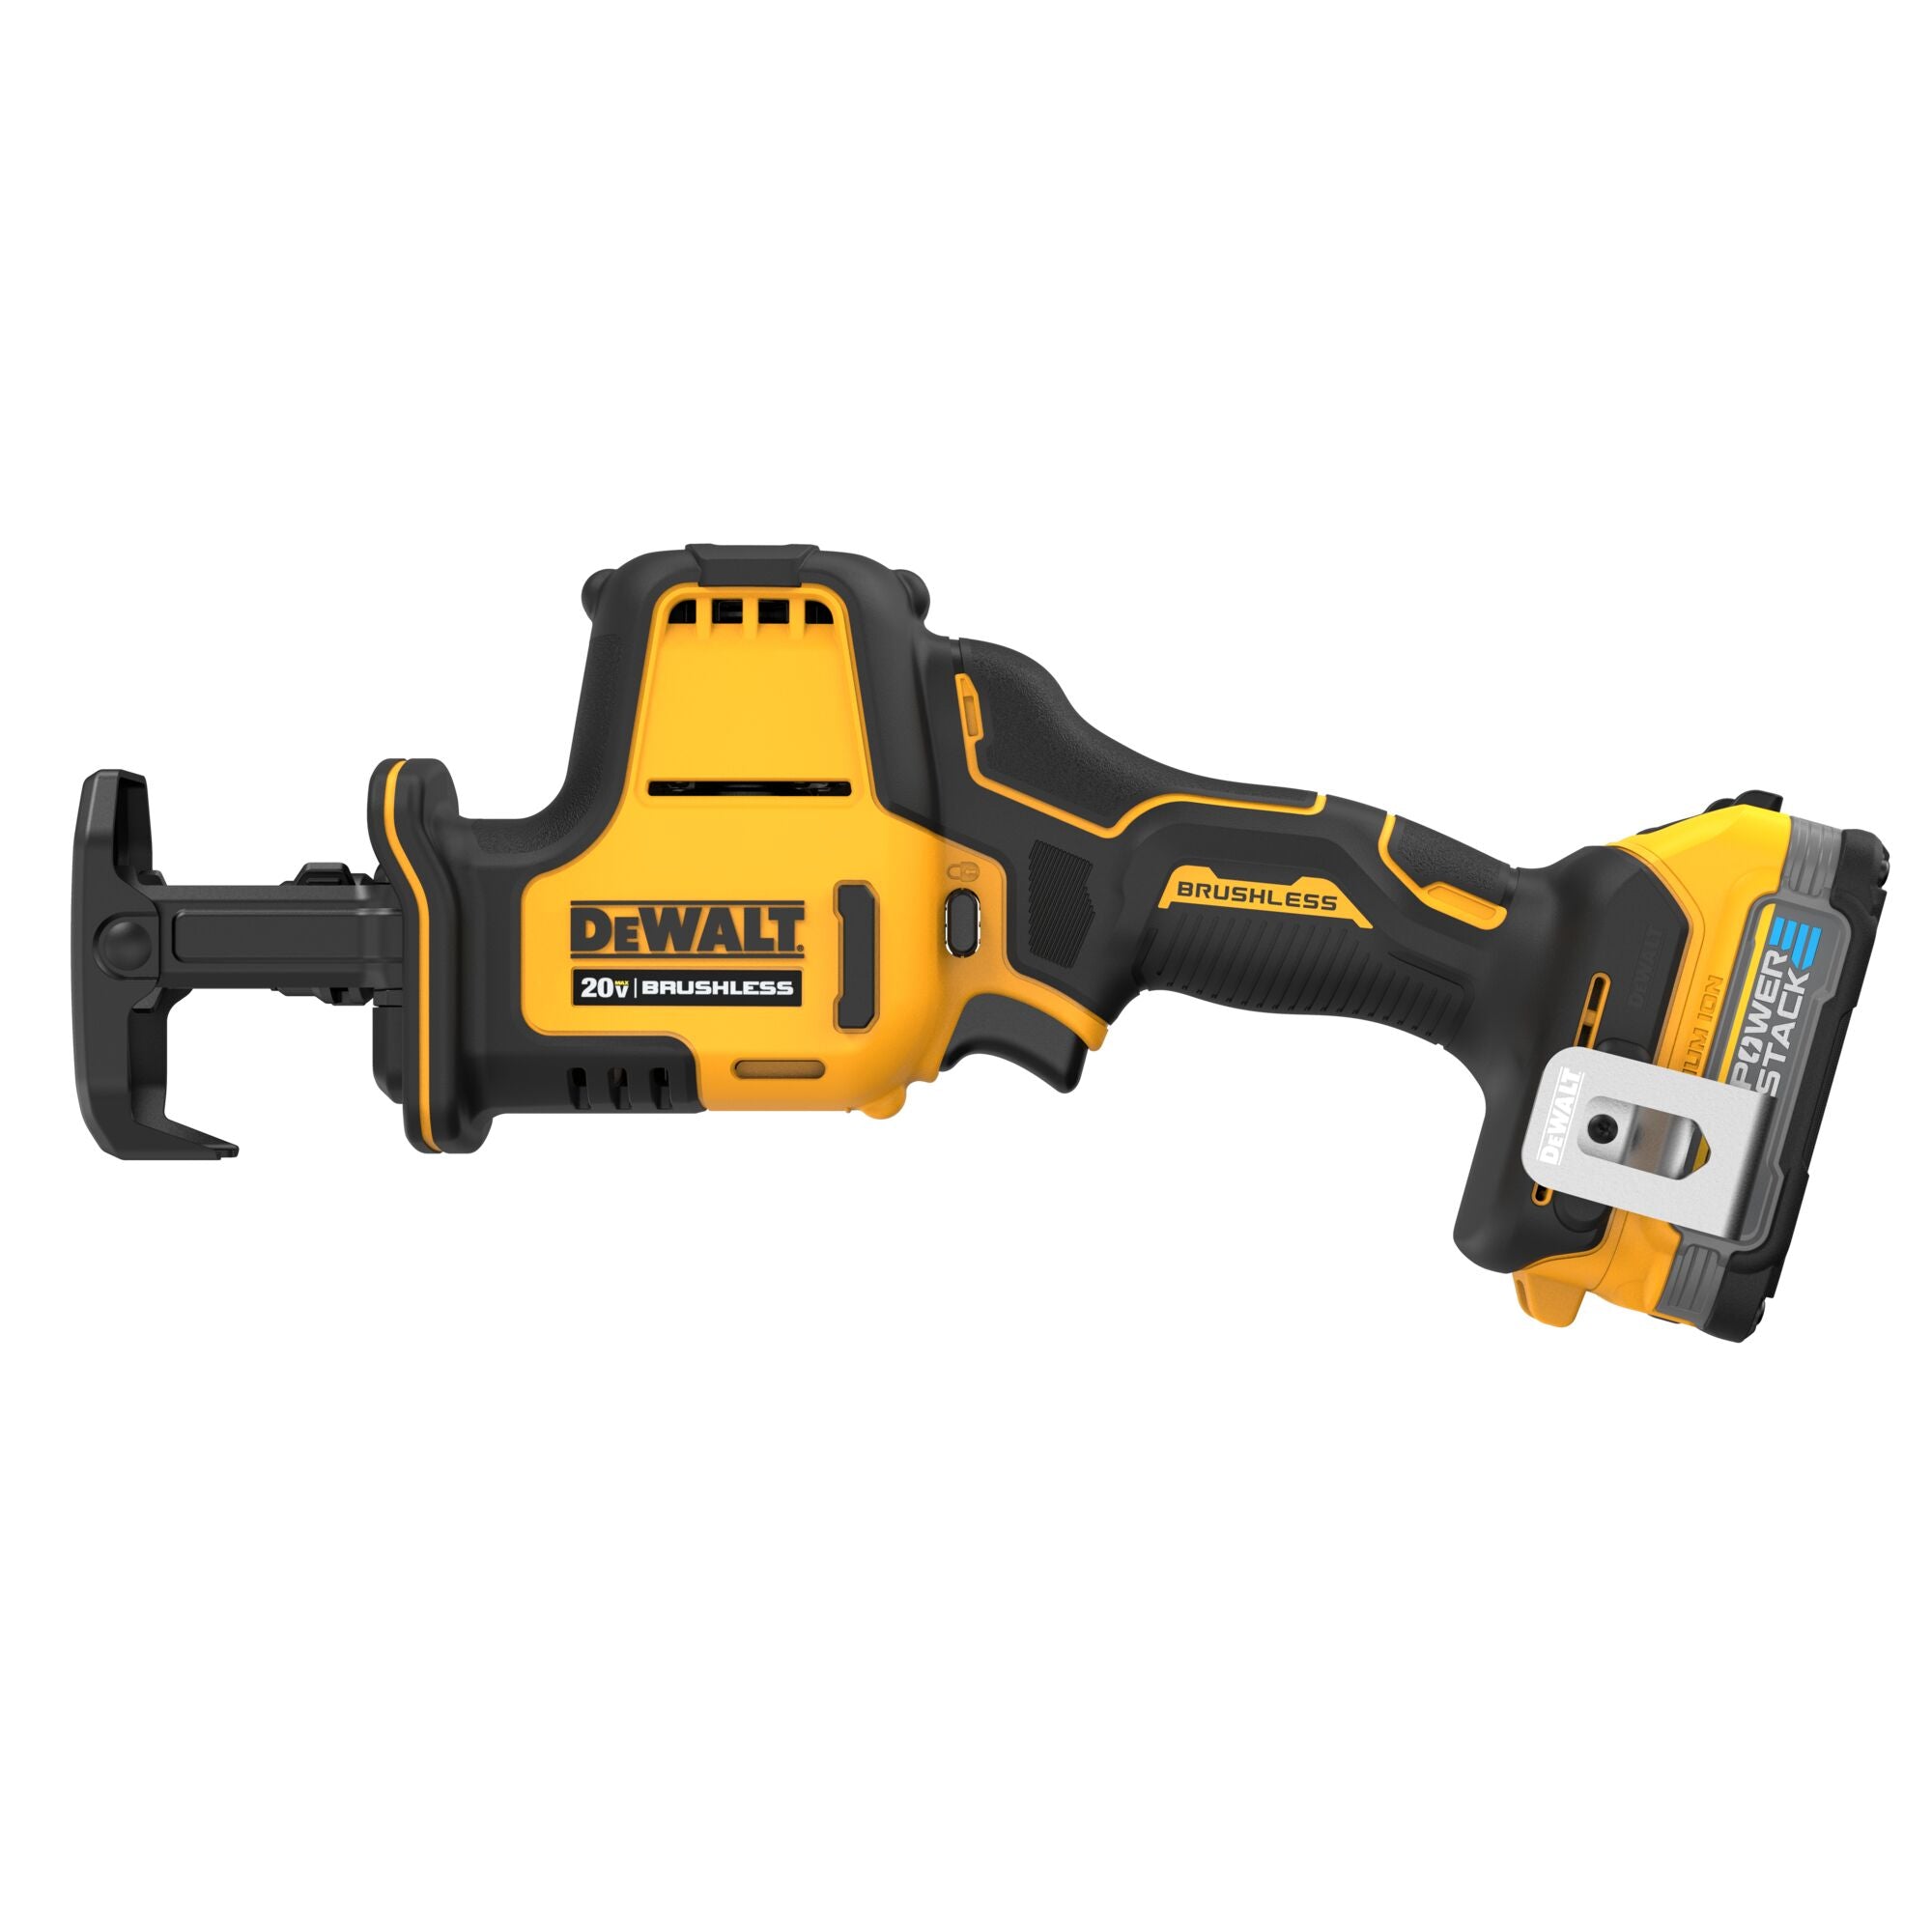 DeWALT DCS369B Reciprocating Saw Atomic 20 Volt Tool with Powerstack Battery and Charger